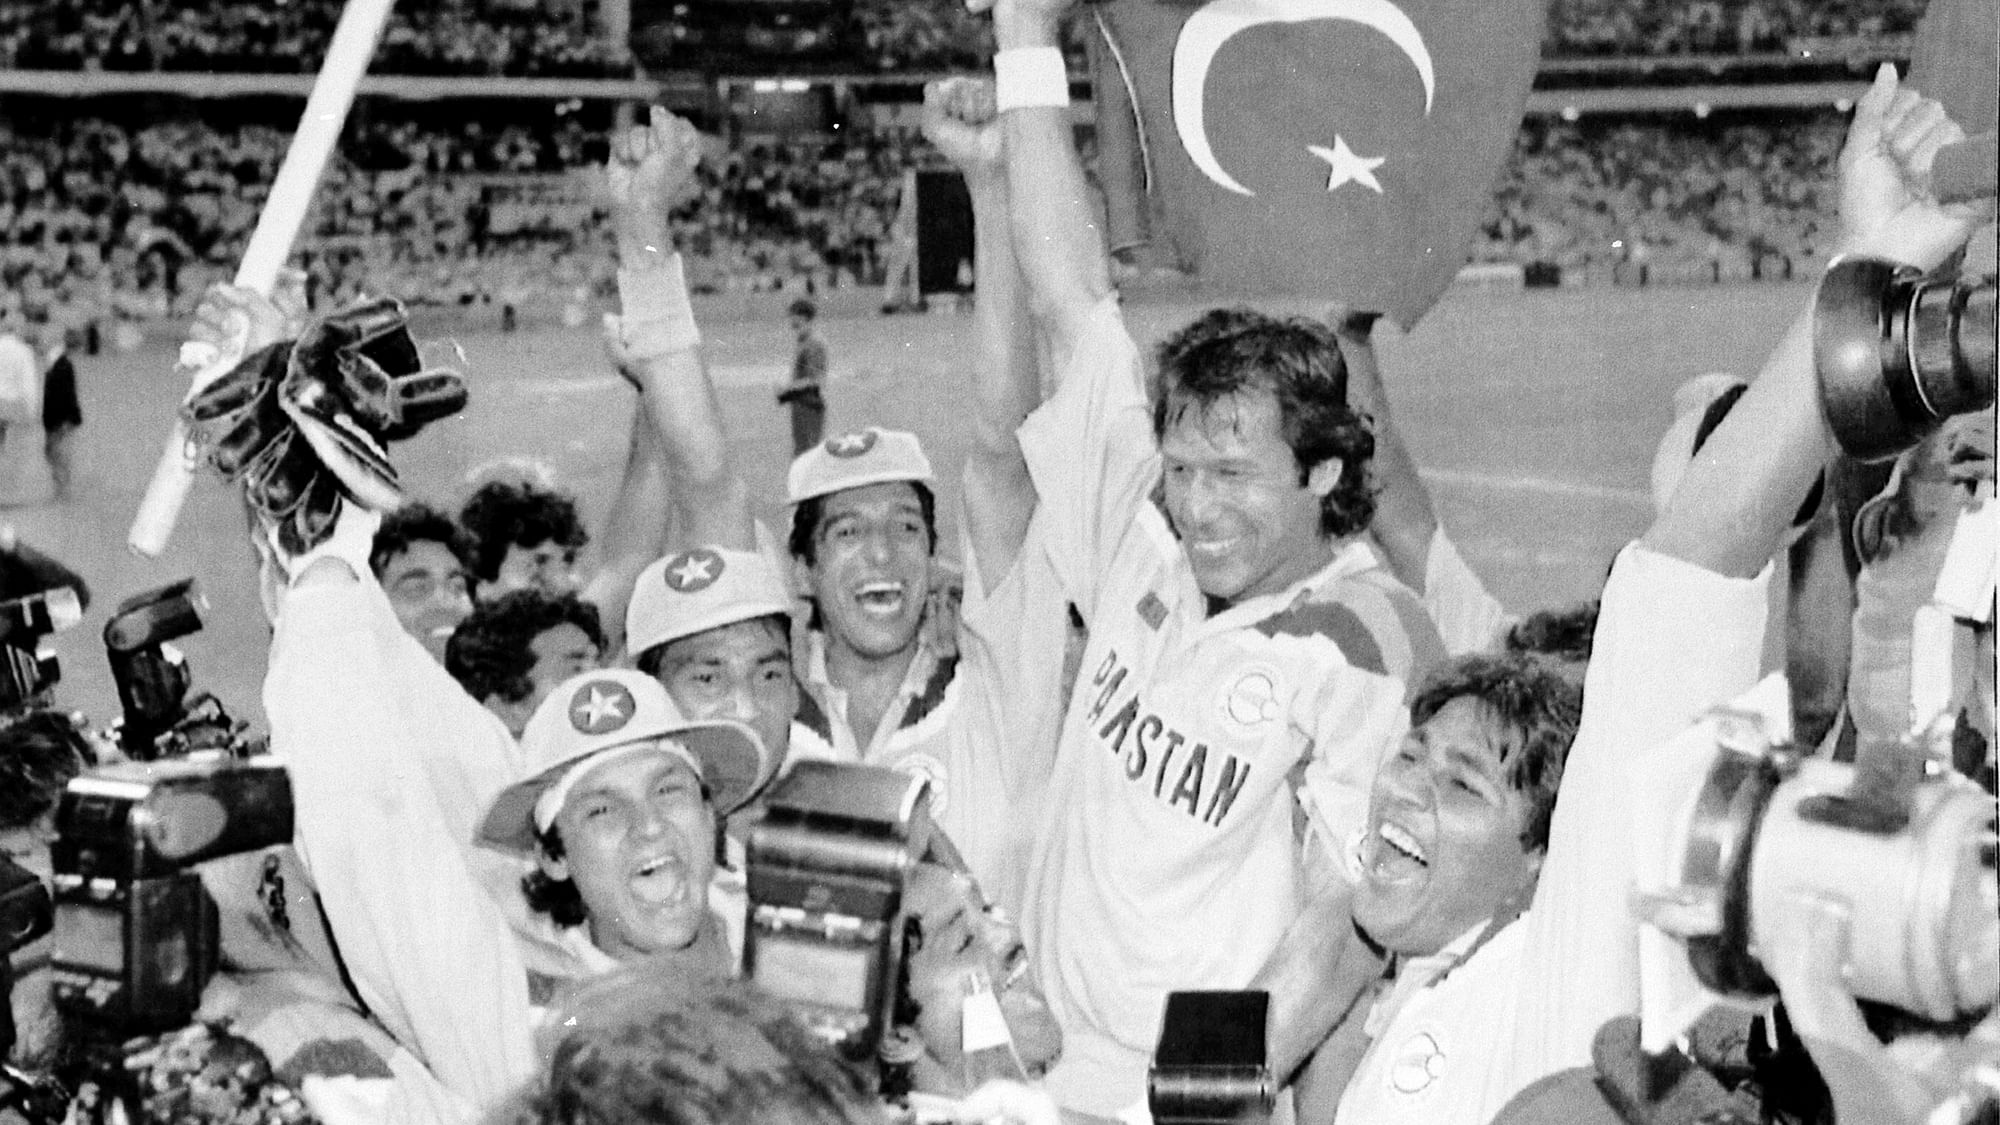 In this March 25, 1992 file photo, Pakistan’s cricket captain Imran Khan, waving a Pakistan flag, is cheered by his teammates after Pakistan defeated England in the World Cup Cricket final, in Melbourne, Australia.&nbsp;